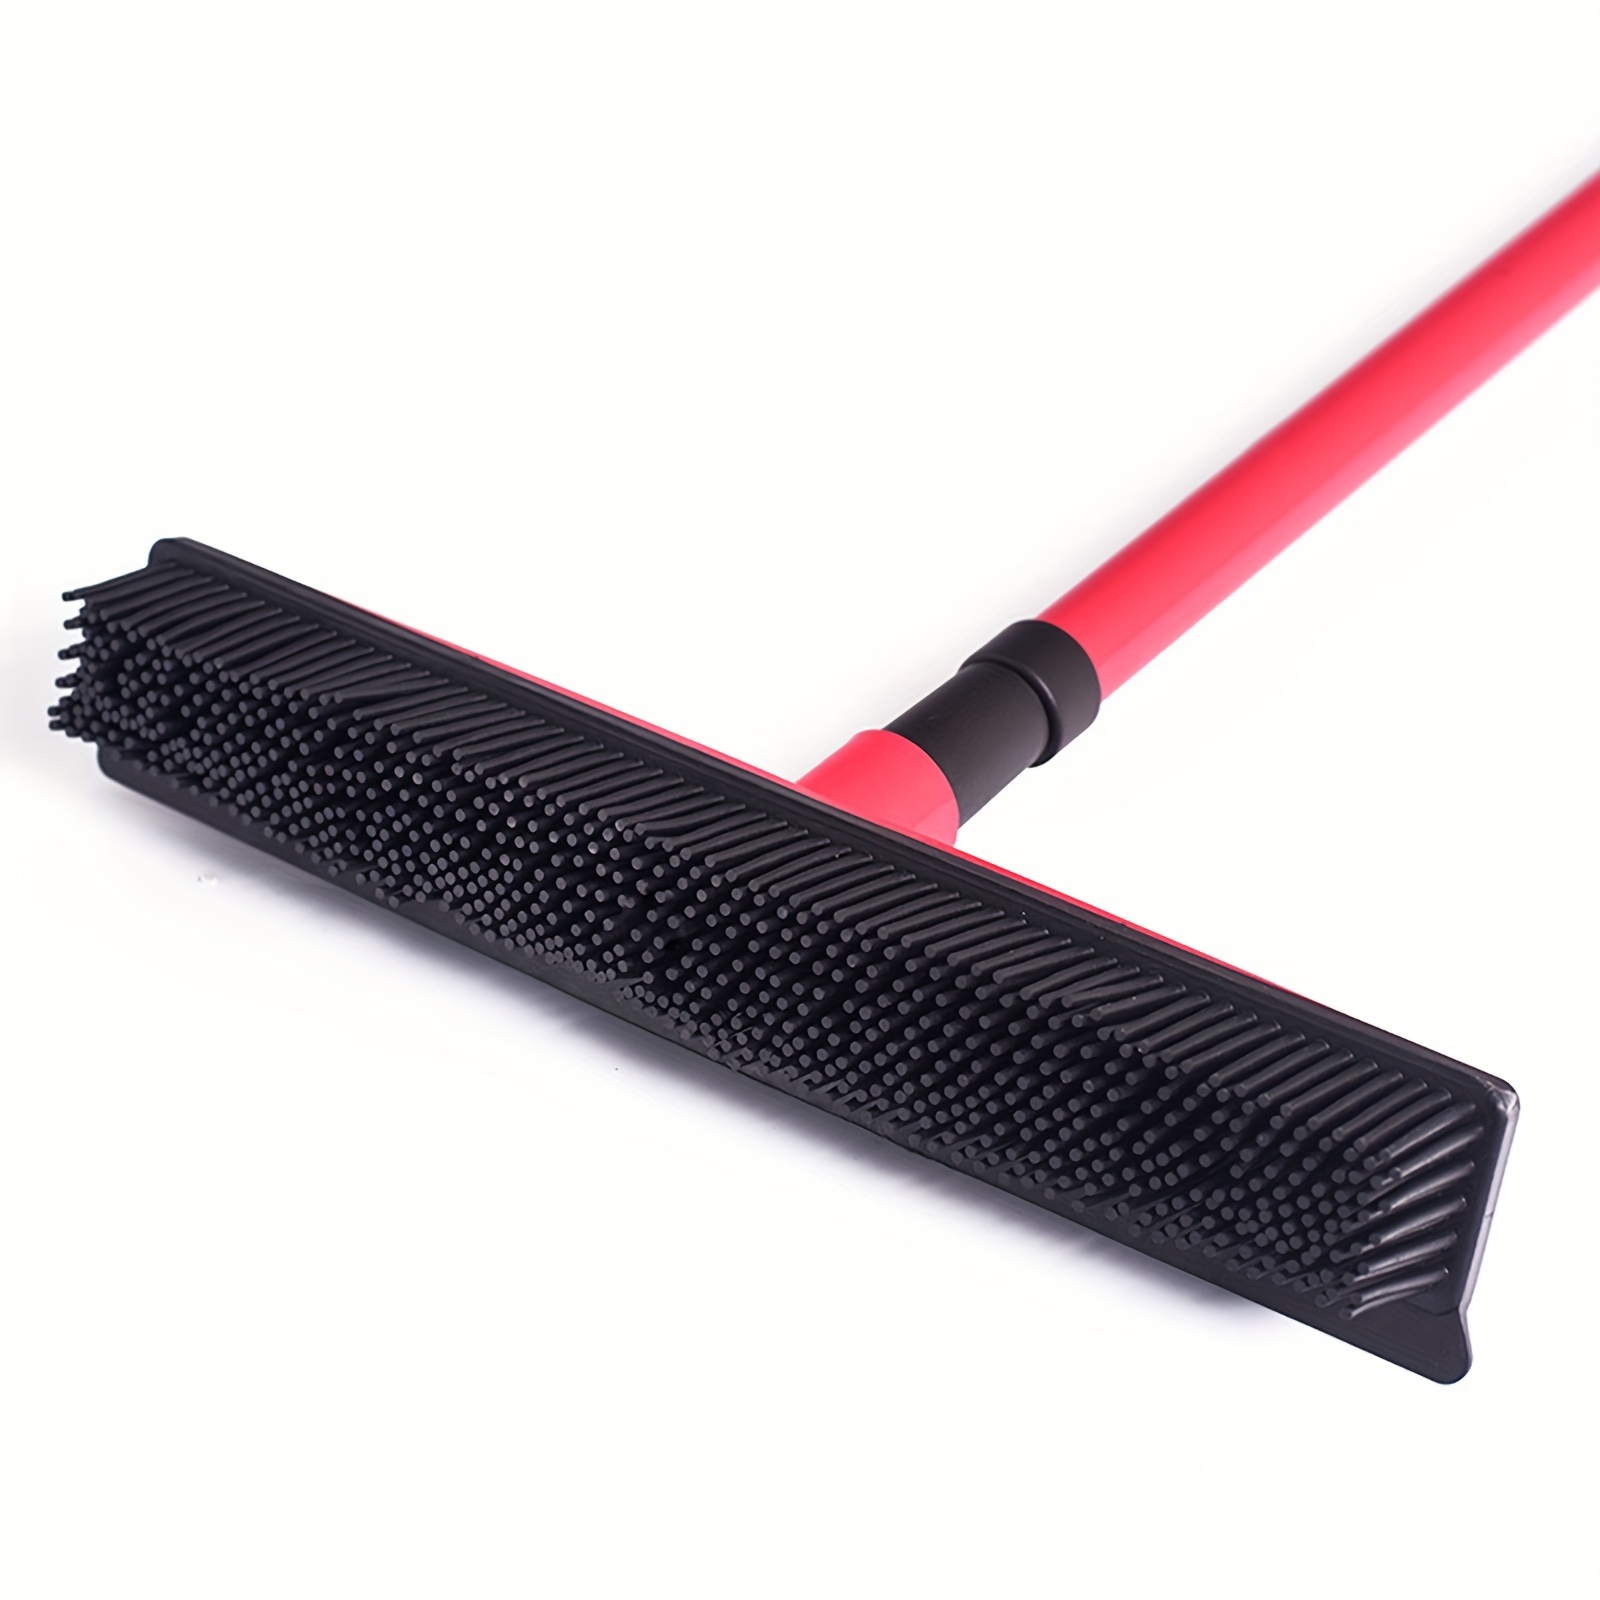 Ljxzxmy Rubber Broom Carpet Rake for Pet Hair Removal Portable Hair Remover with Squeegee Broom Hair Removal Brush Pet Hair Removal Tool for Fluff Car